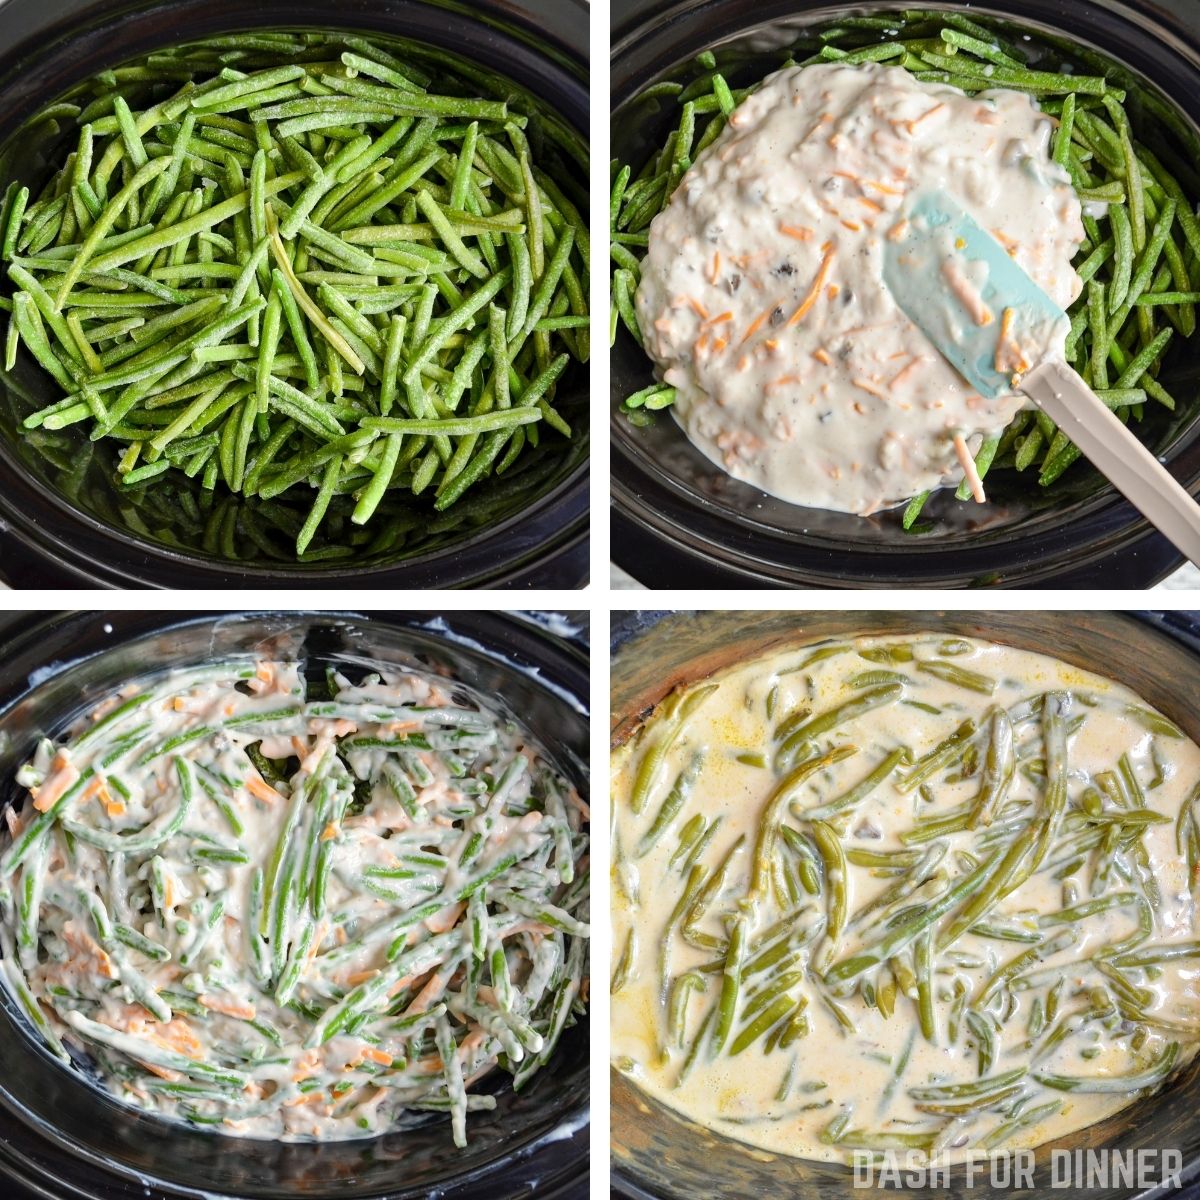 How to make green bean casserole in a slow cooker.